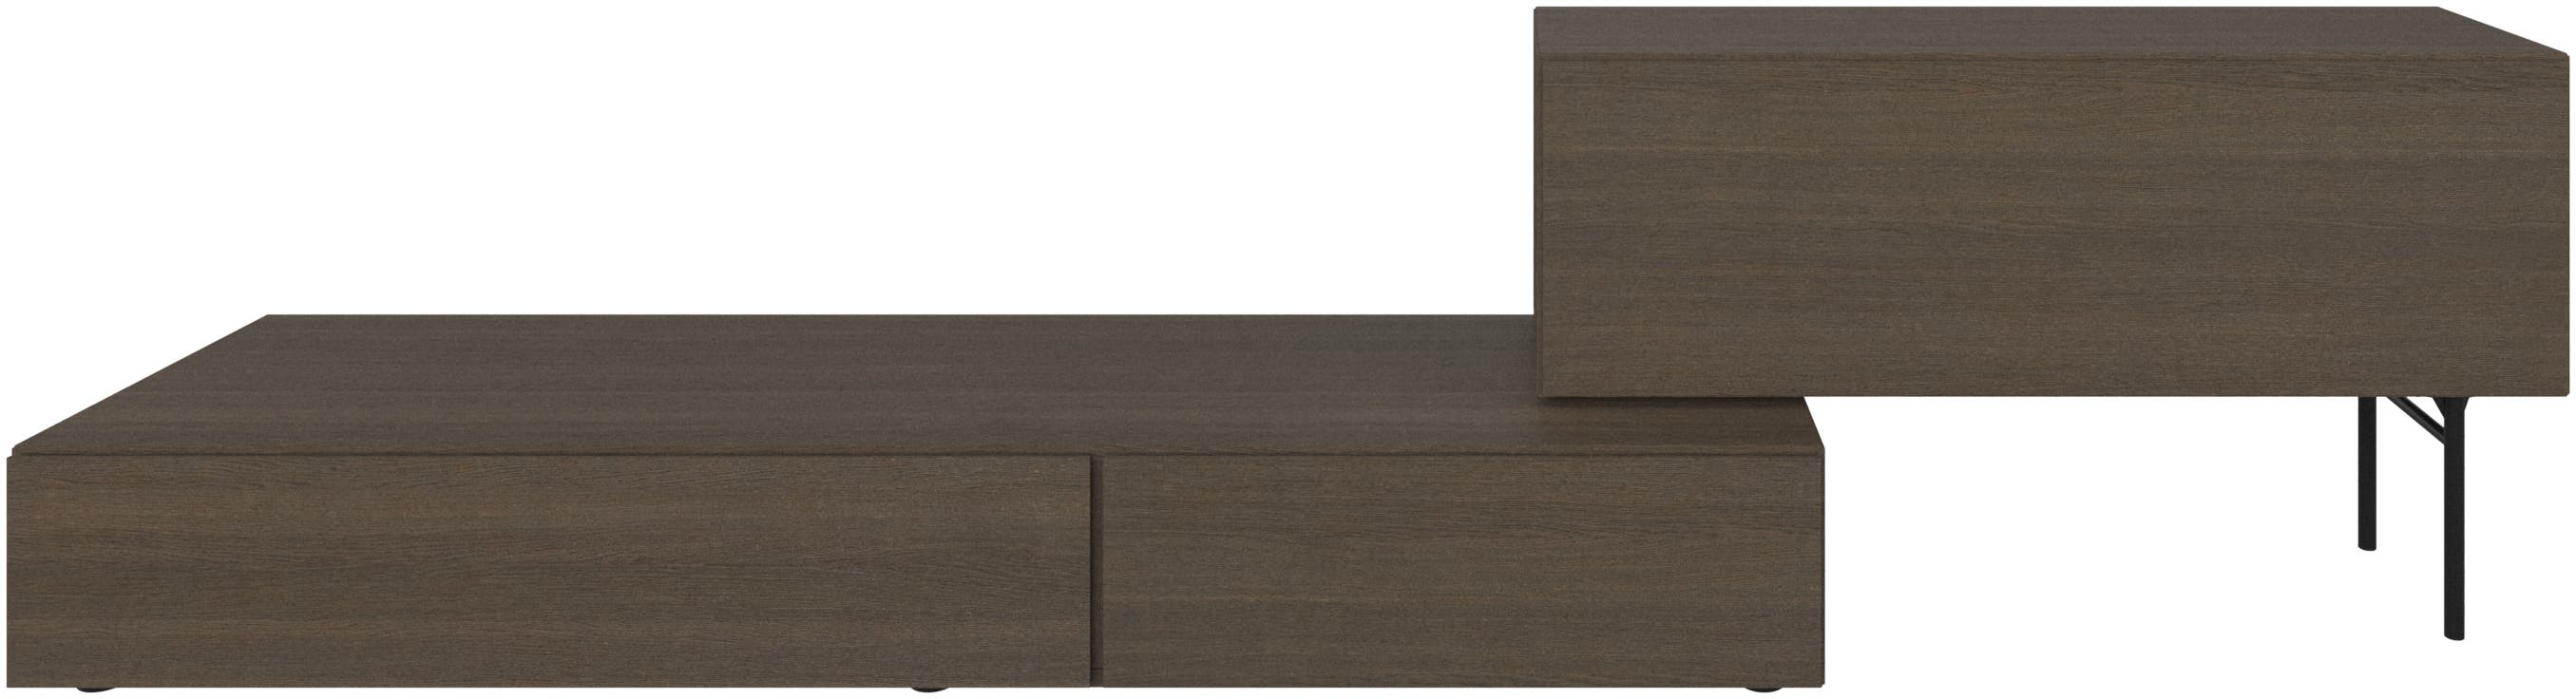 Lugano wall system with drop-down doors and drawer